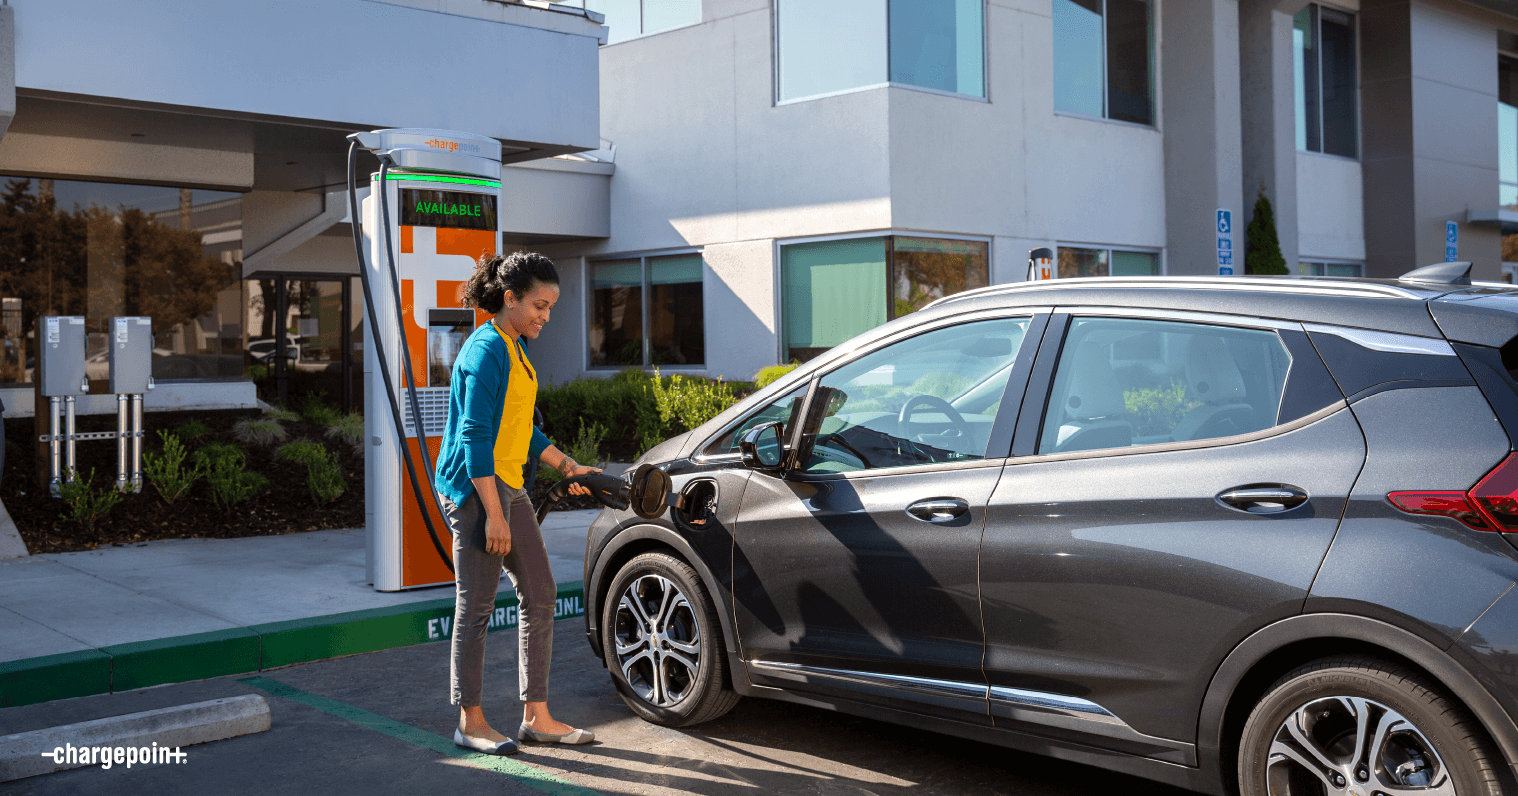 ChargePoint-5-Ways-to-Master-EV-Etiquette